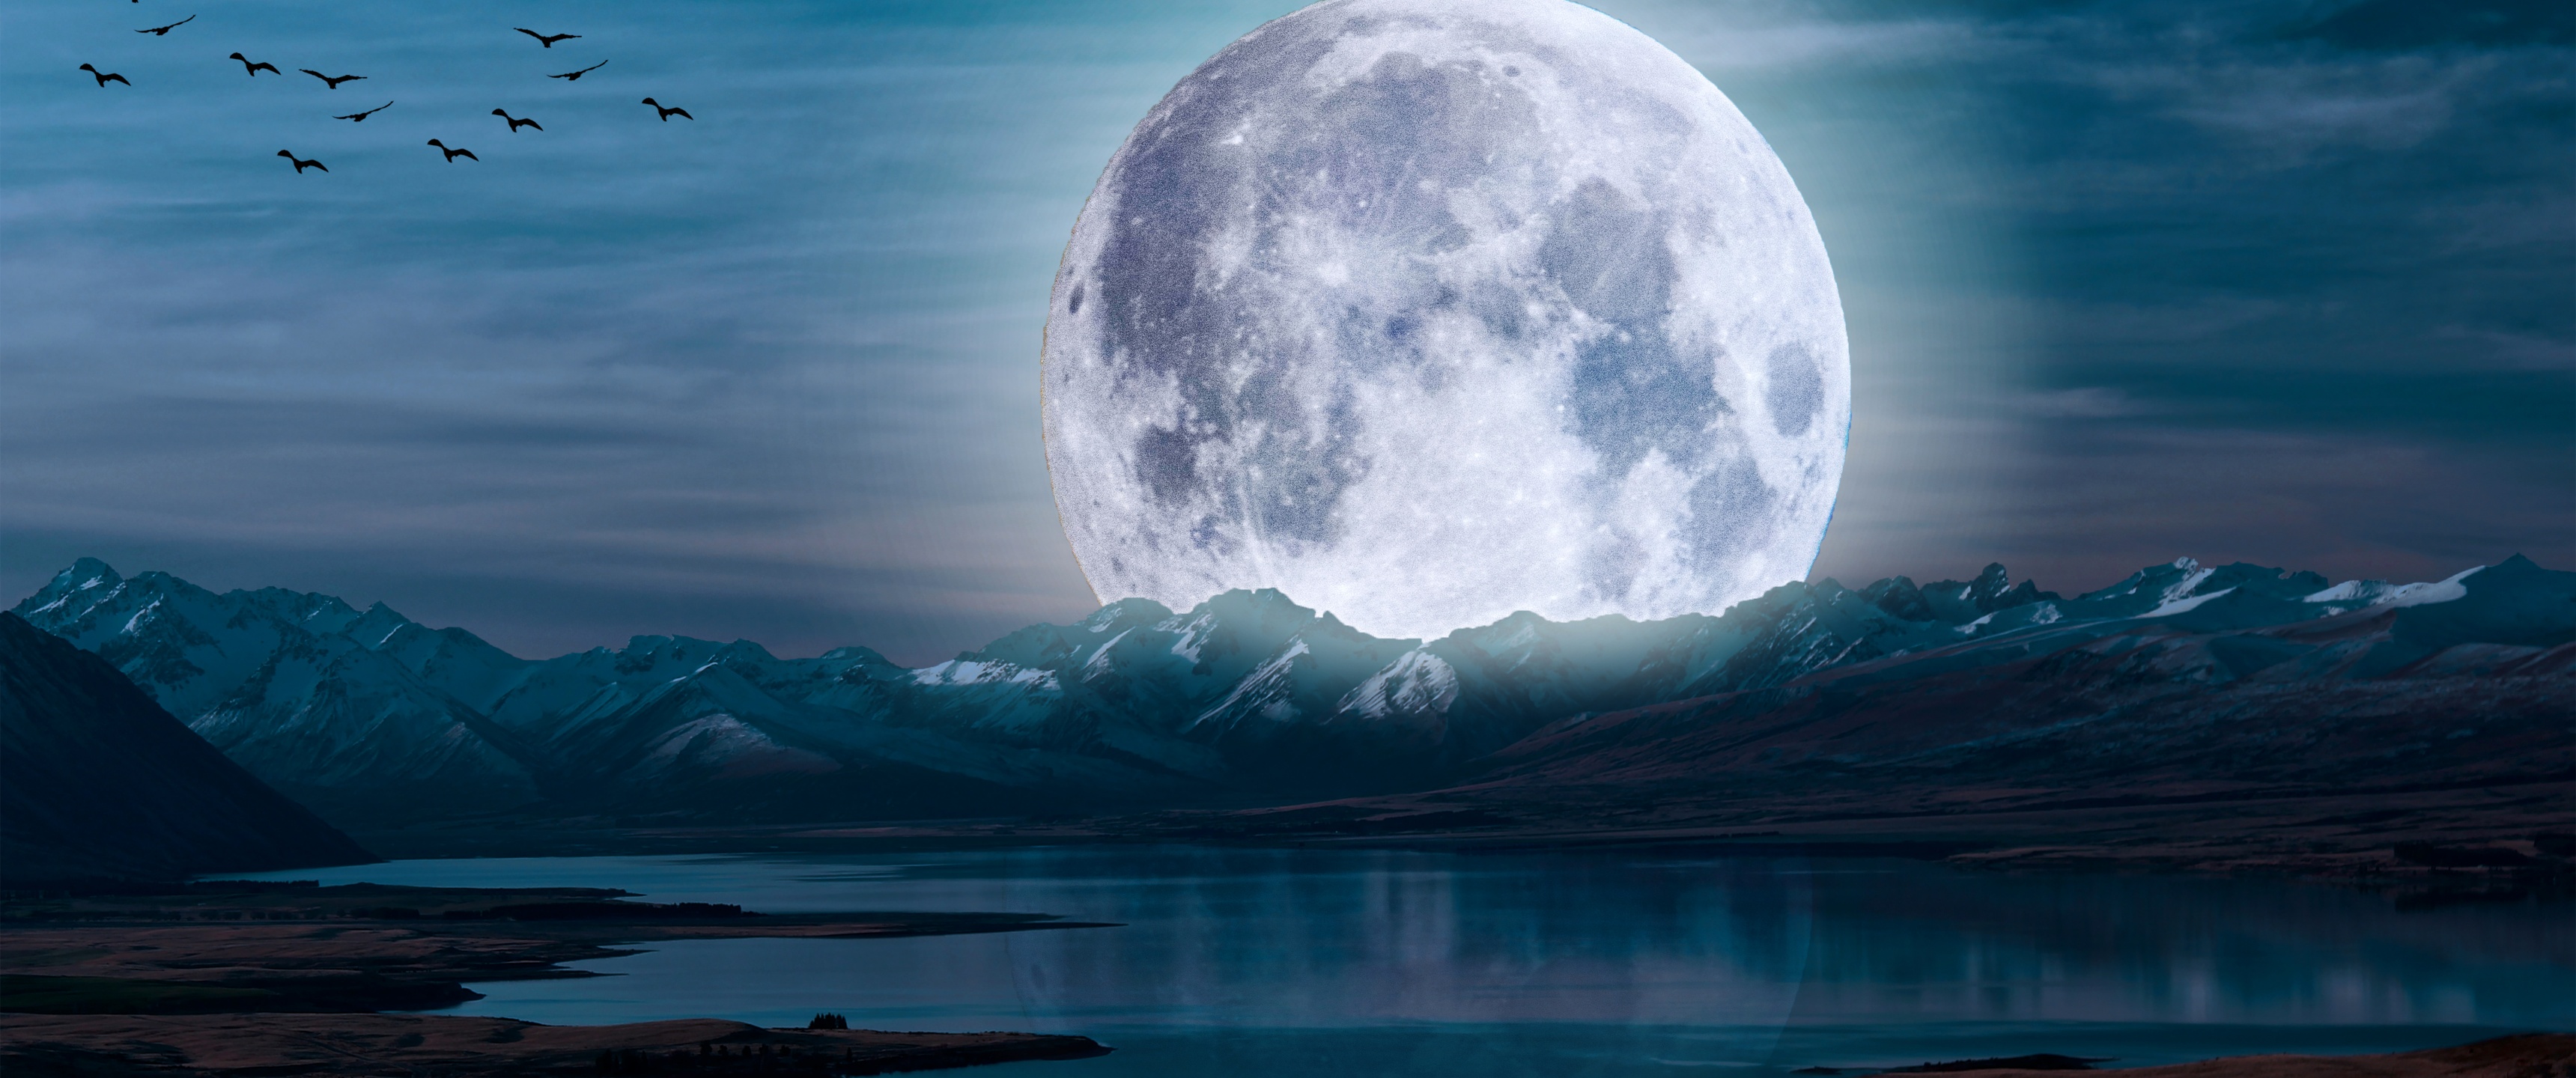 Moon Night Landscape Background, Moon, Night, Landscape Background Image  And Wallpaper for Free Download